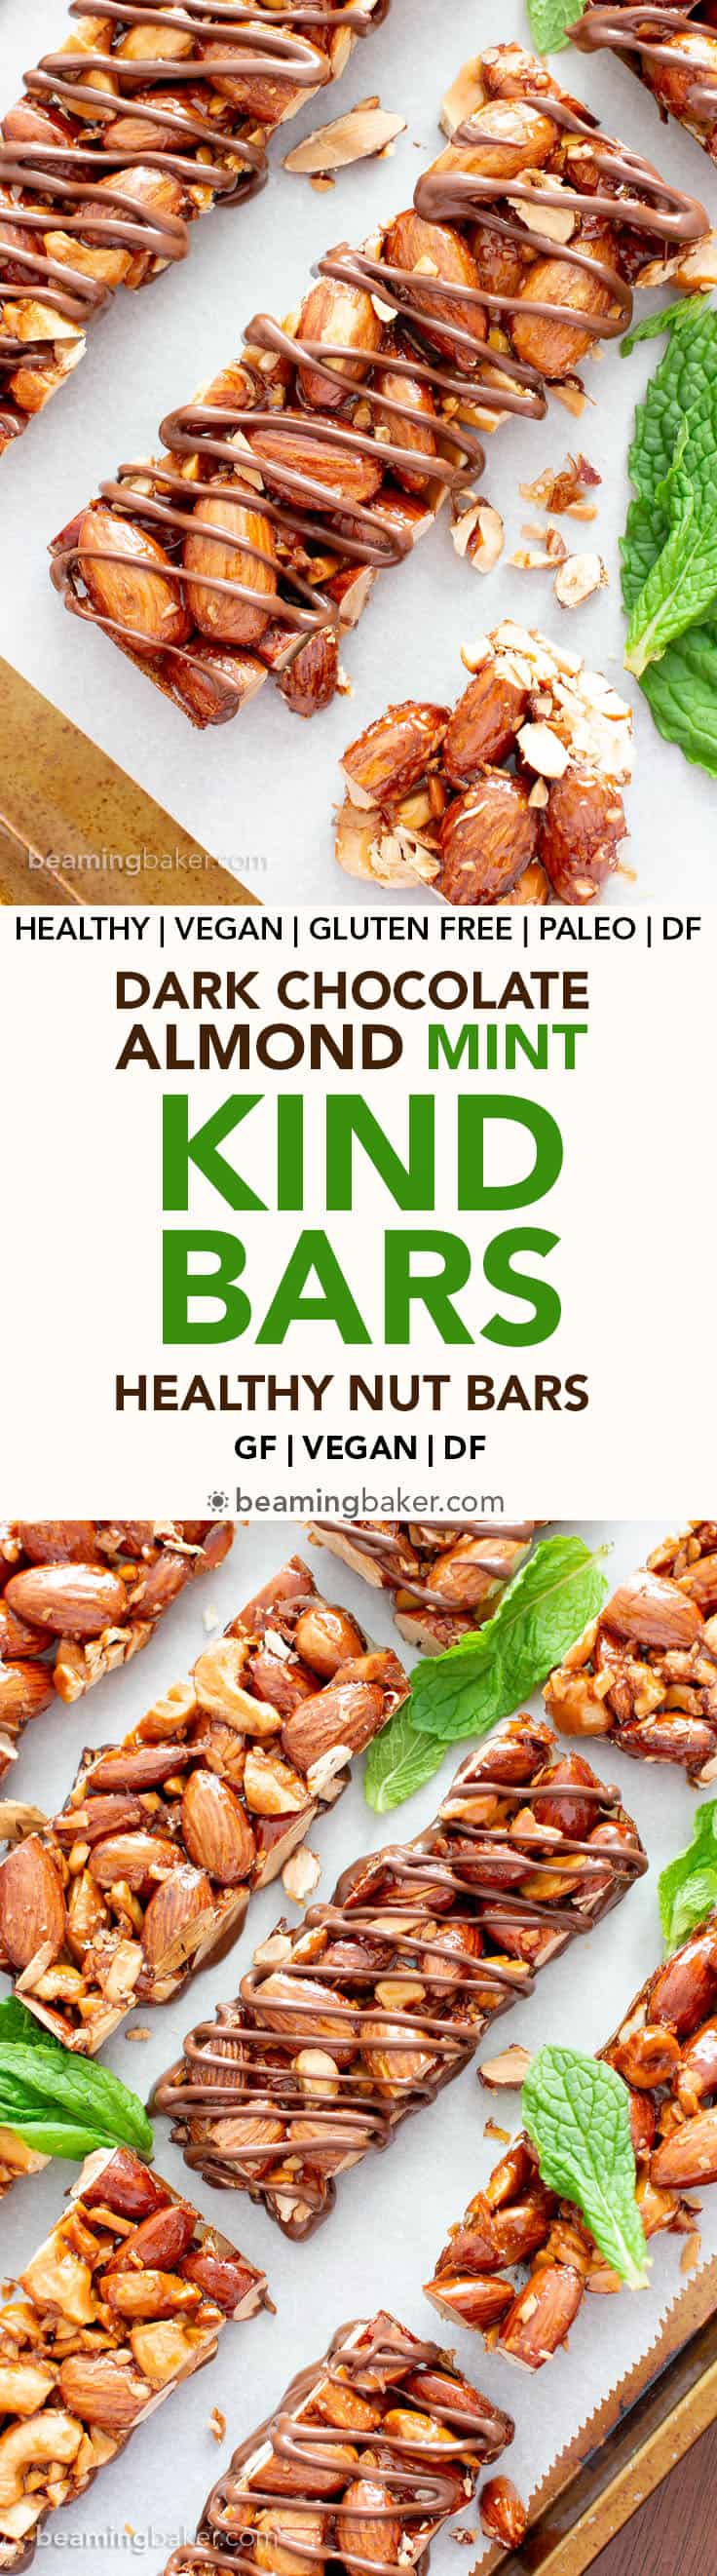 Dark Chocolate Almond Mint Homemade KIND Bar Recipe (V, GF): an easy recipe for festive homemade KIND bars, bursting with refreshing peppermint and coated in velvety rich dark chocolate. Made with healthy ingredients. #Vegan #GlutenFree #BeamingBaker #Paleo #PaleoDessert #HomemadeKINDBars #HealthySnacks #Christmas #HolidayGifts #ProteinRich | Recipe at BeamingBaker.com